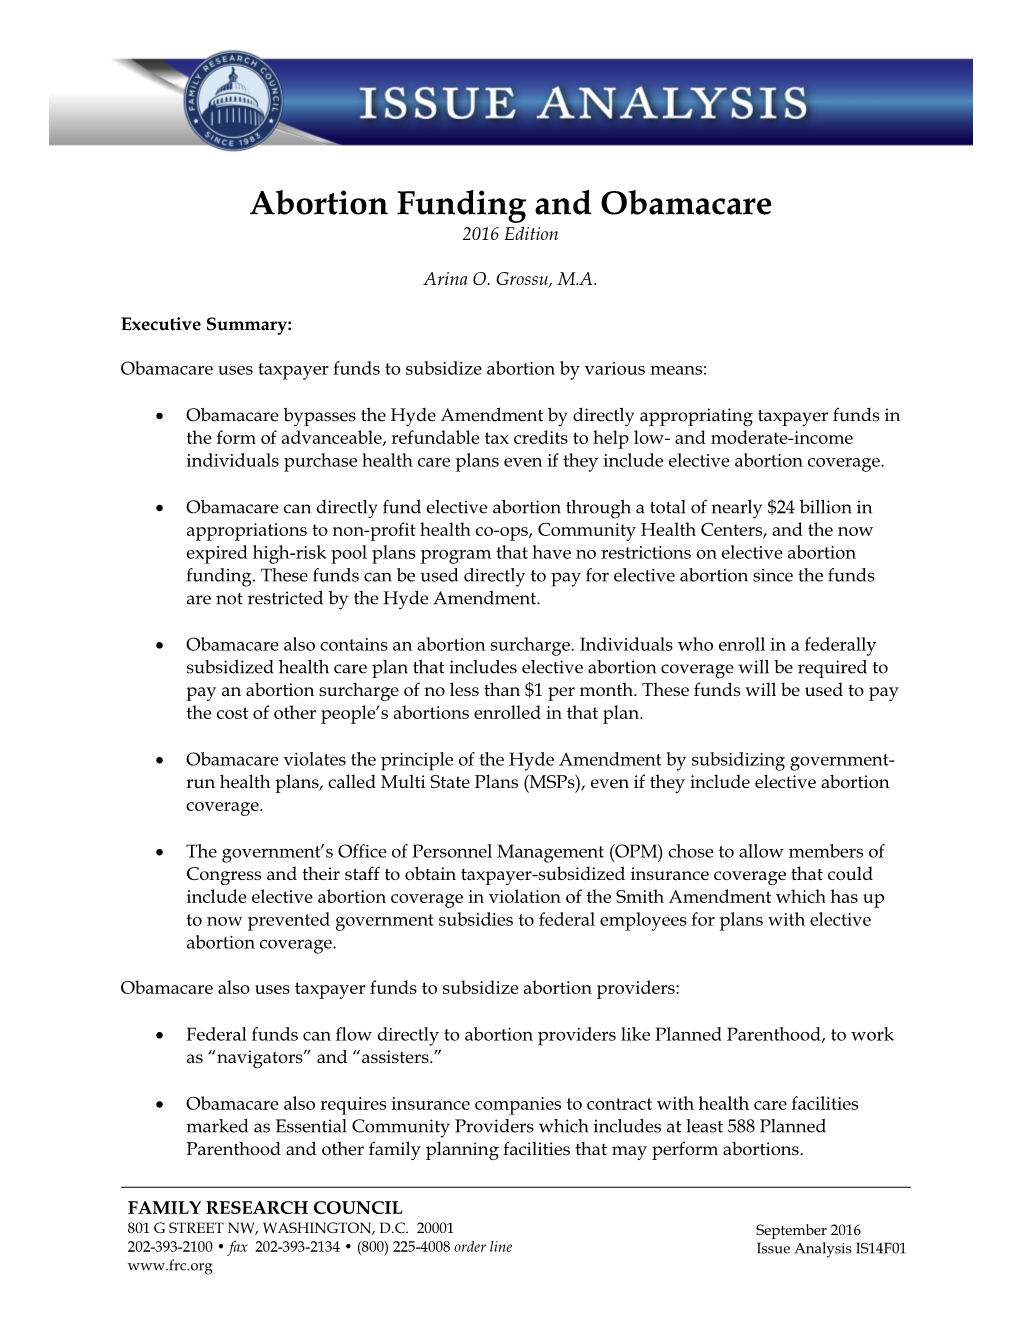 Abortion Funding and Obamacare 2016 Edition